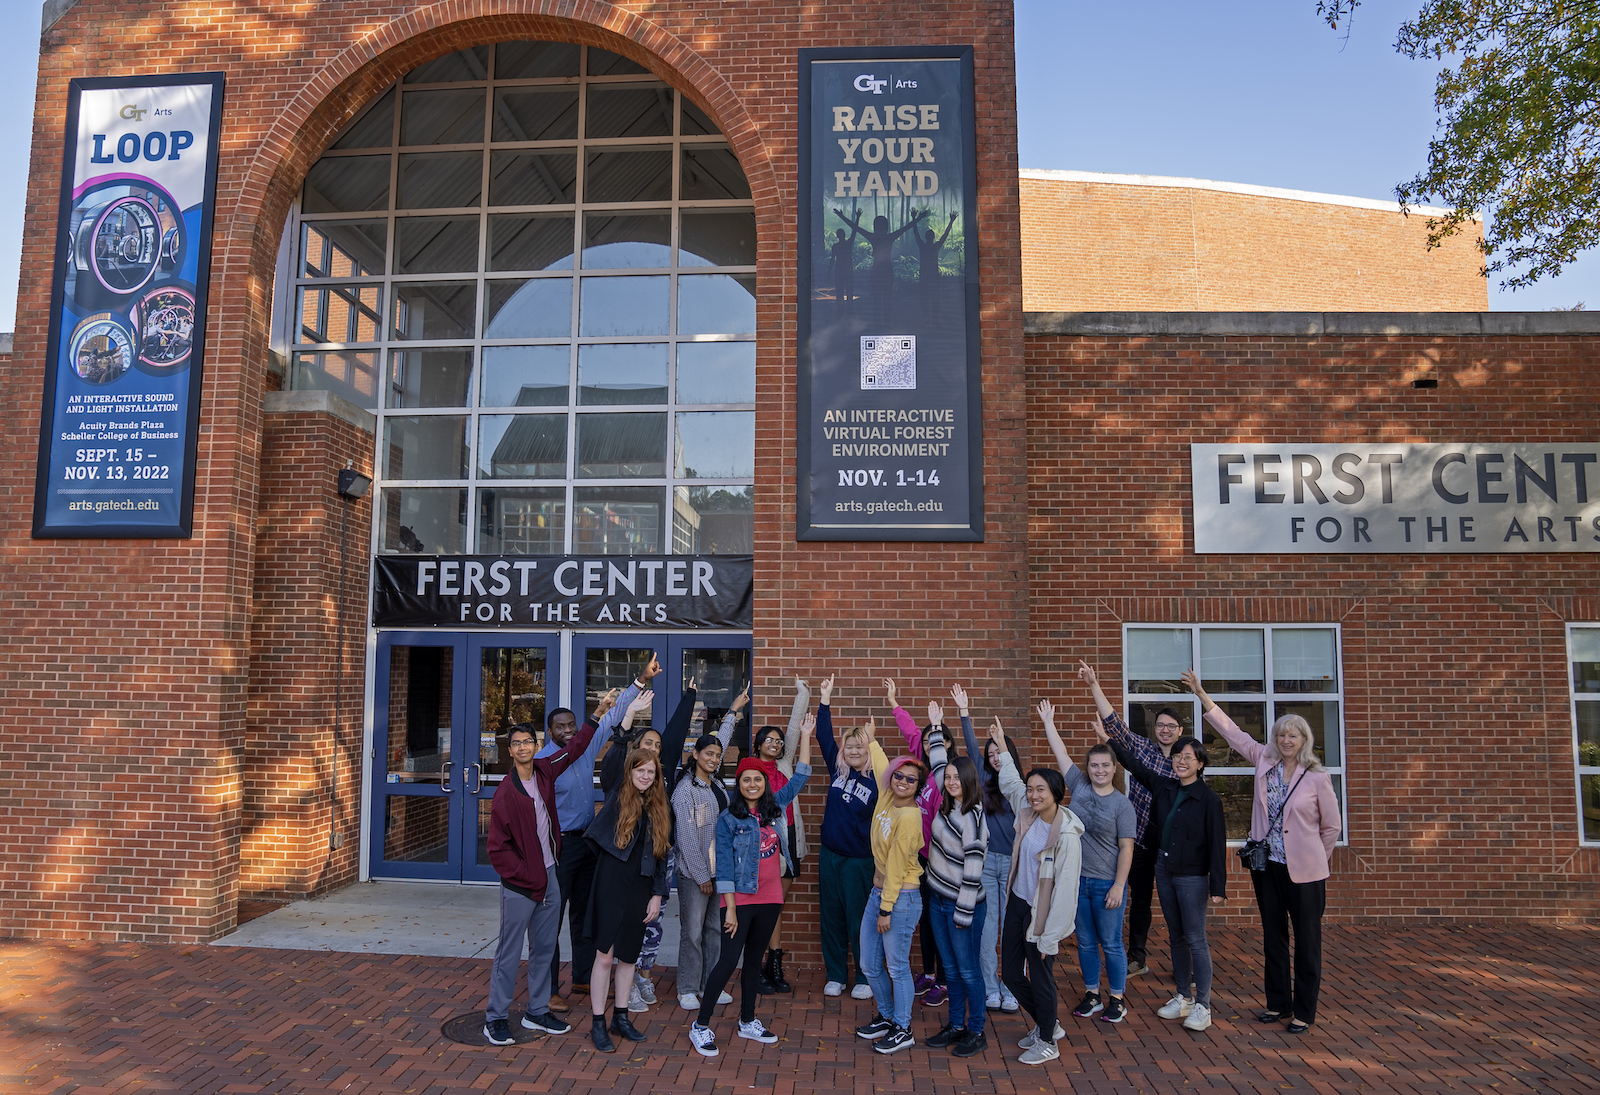 Students and faculty at the Ferst Center for the Arts, pointing at a sign for "Raise Your Hand."